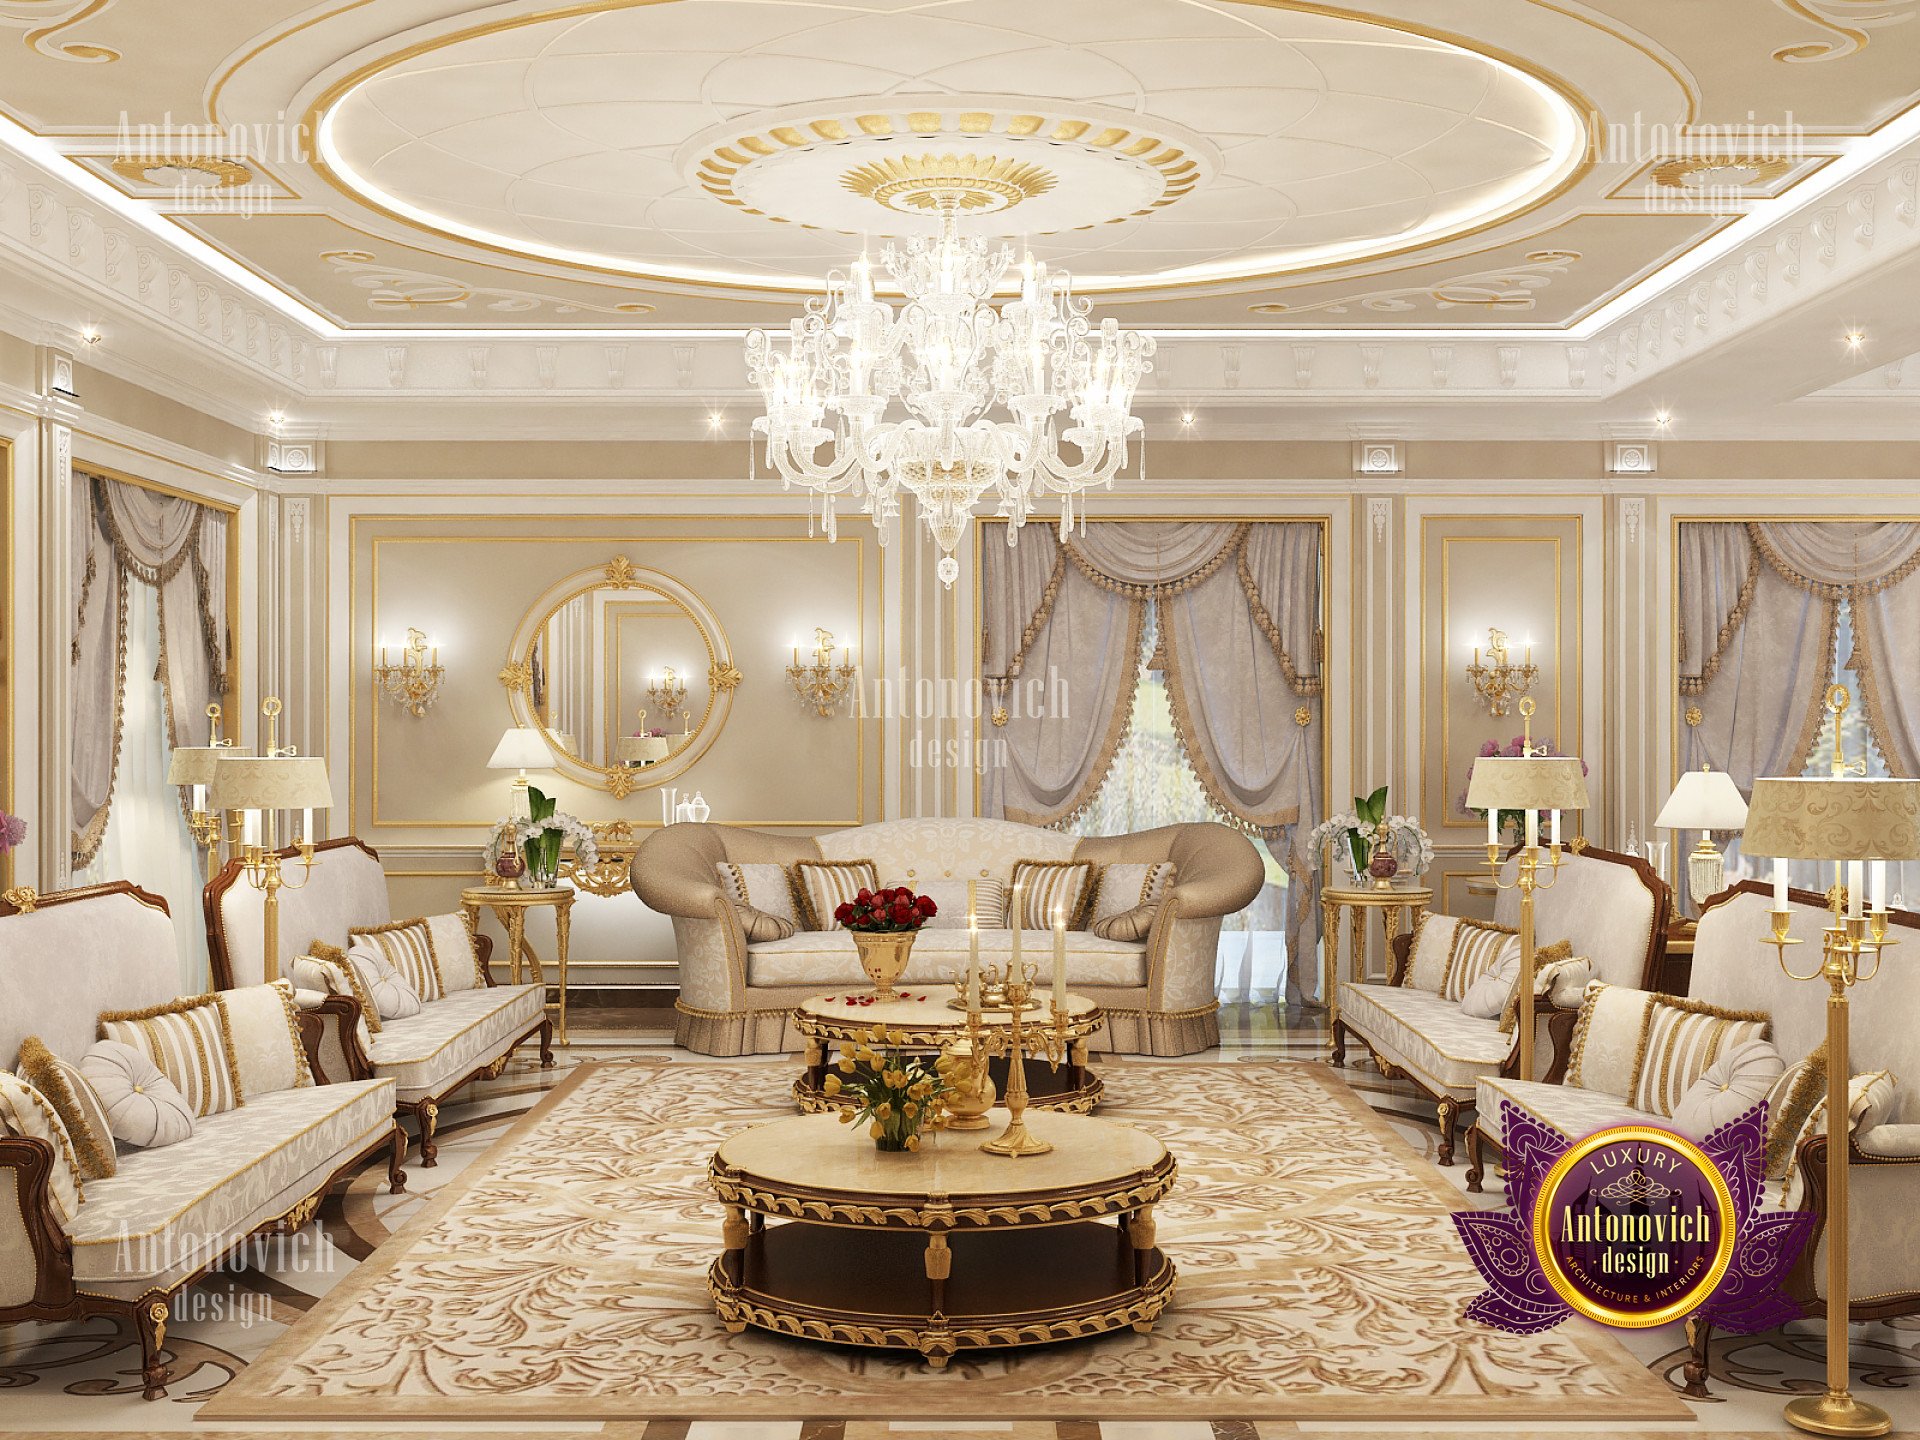 House Interior Design: Aesthetic Luxury For Every Room